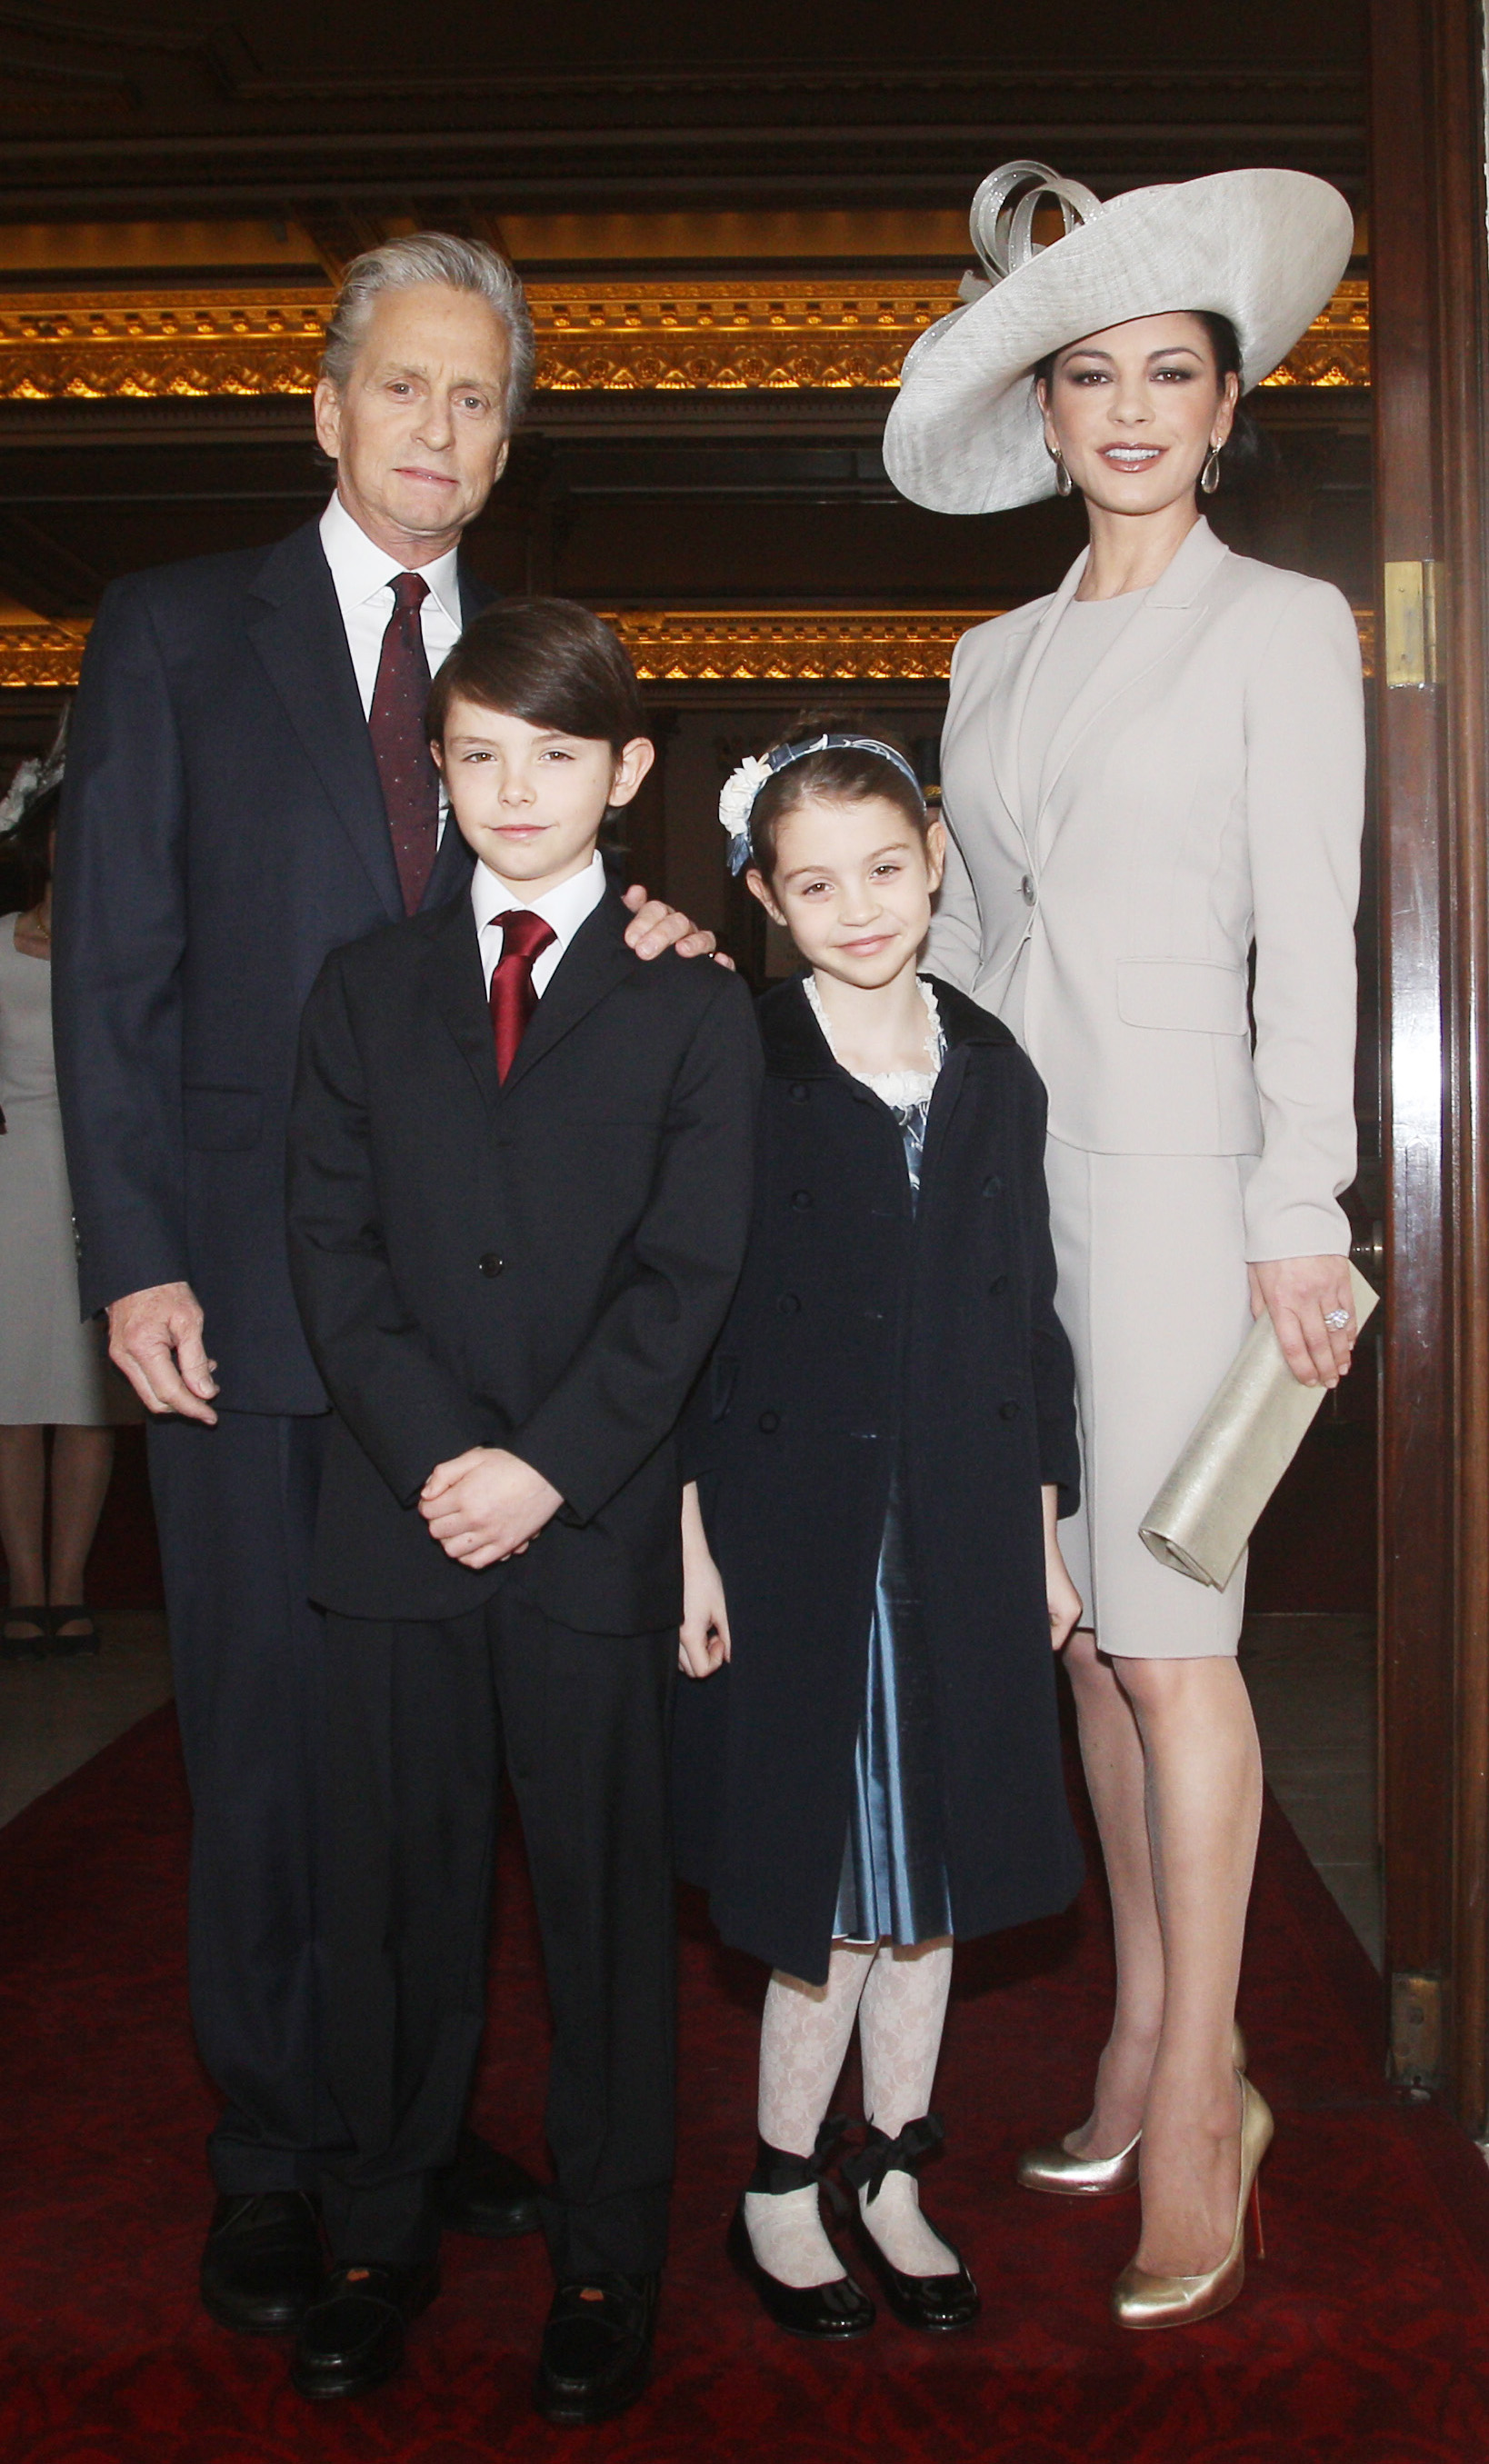 Catherine Zeta Jones and Michael Douglas with their children Dylan and Carys in London in 2011 | Source: Getty Images